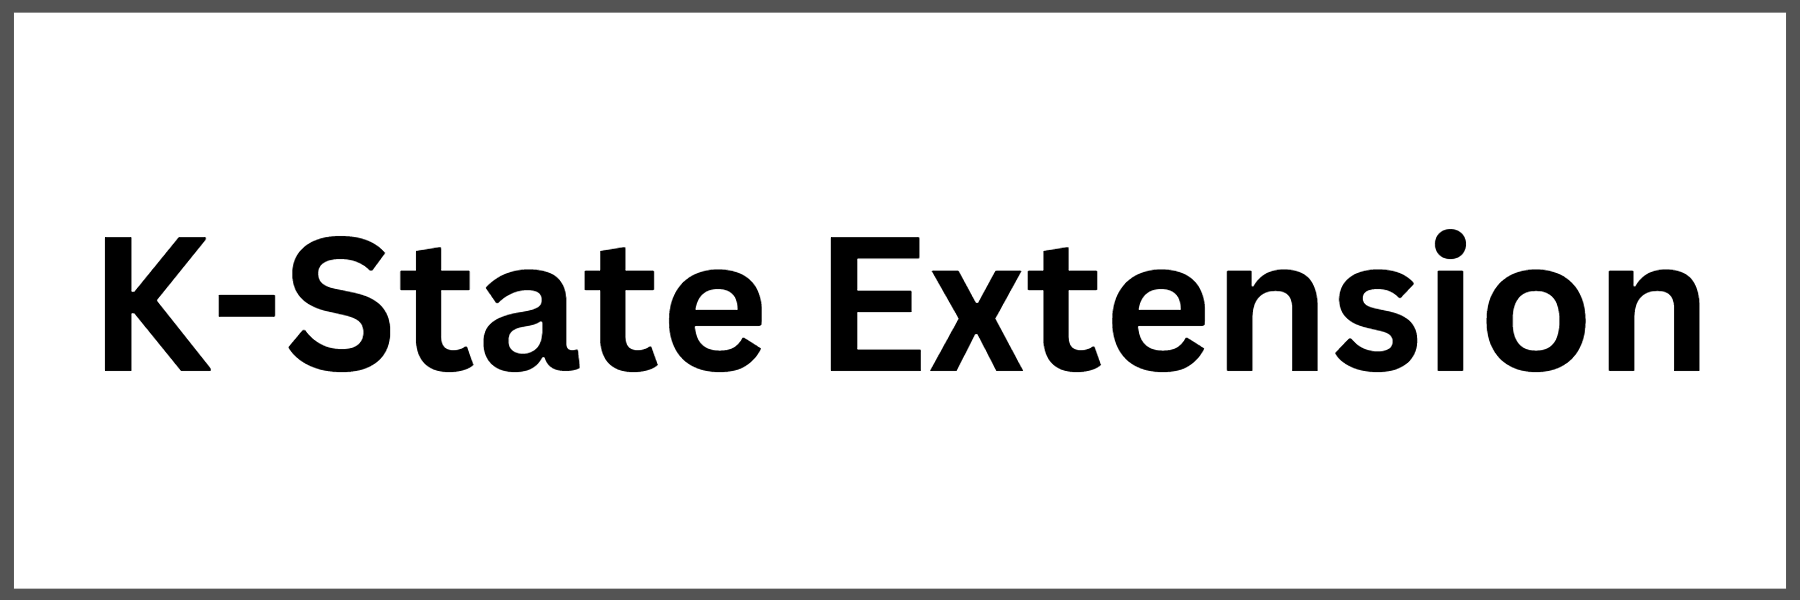 K-State Extension